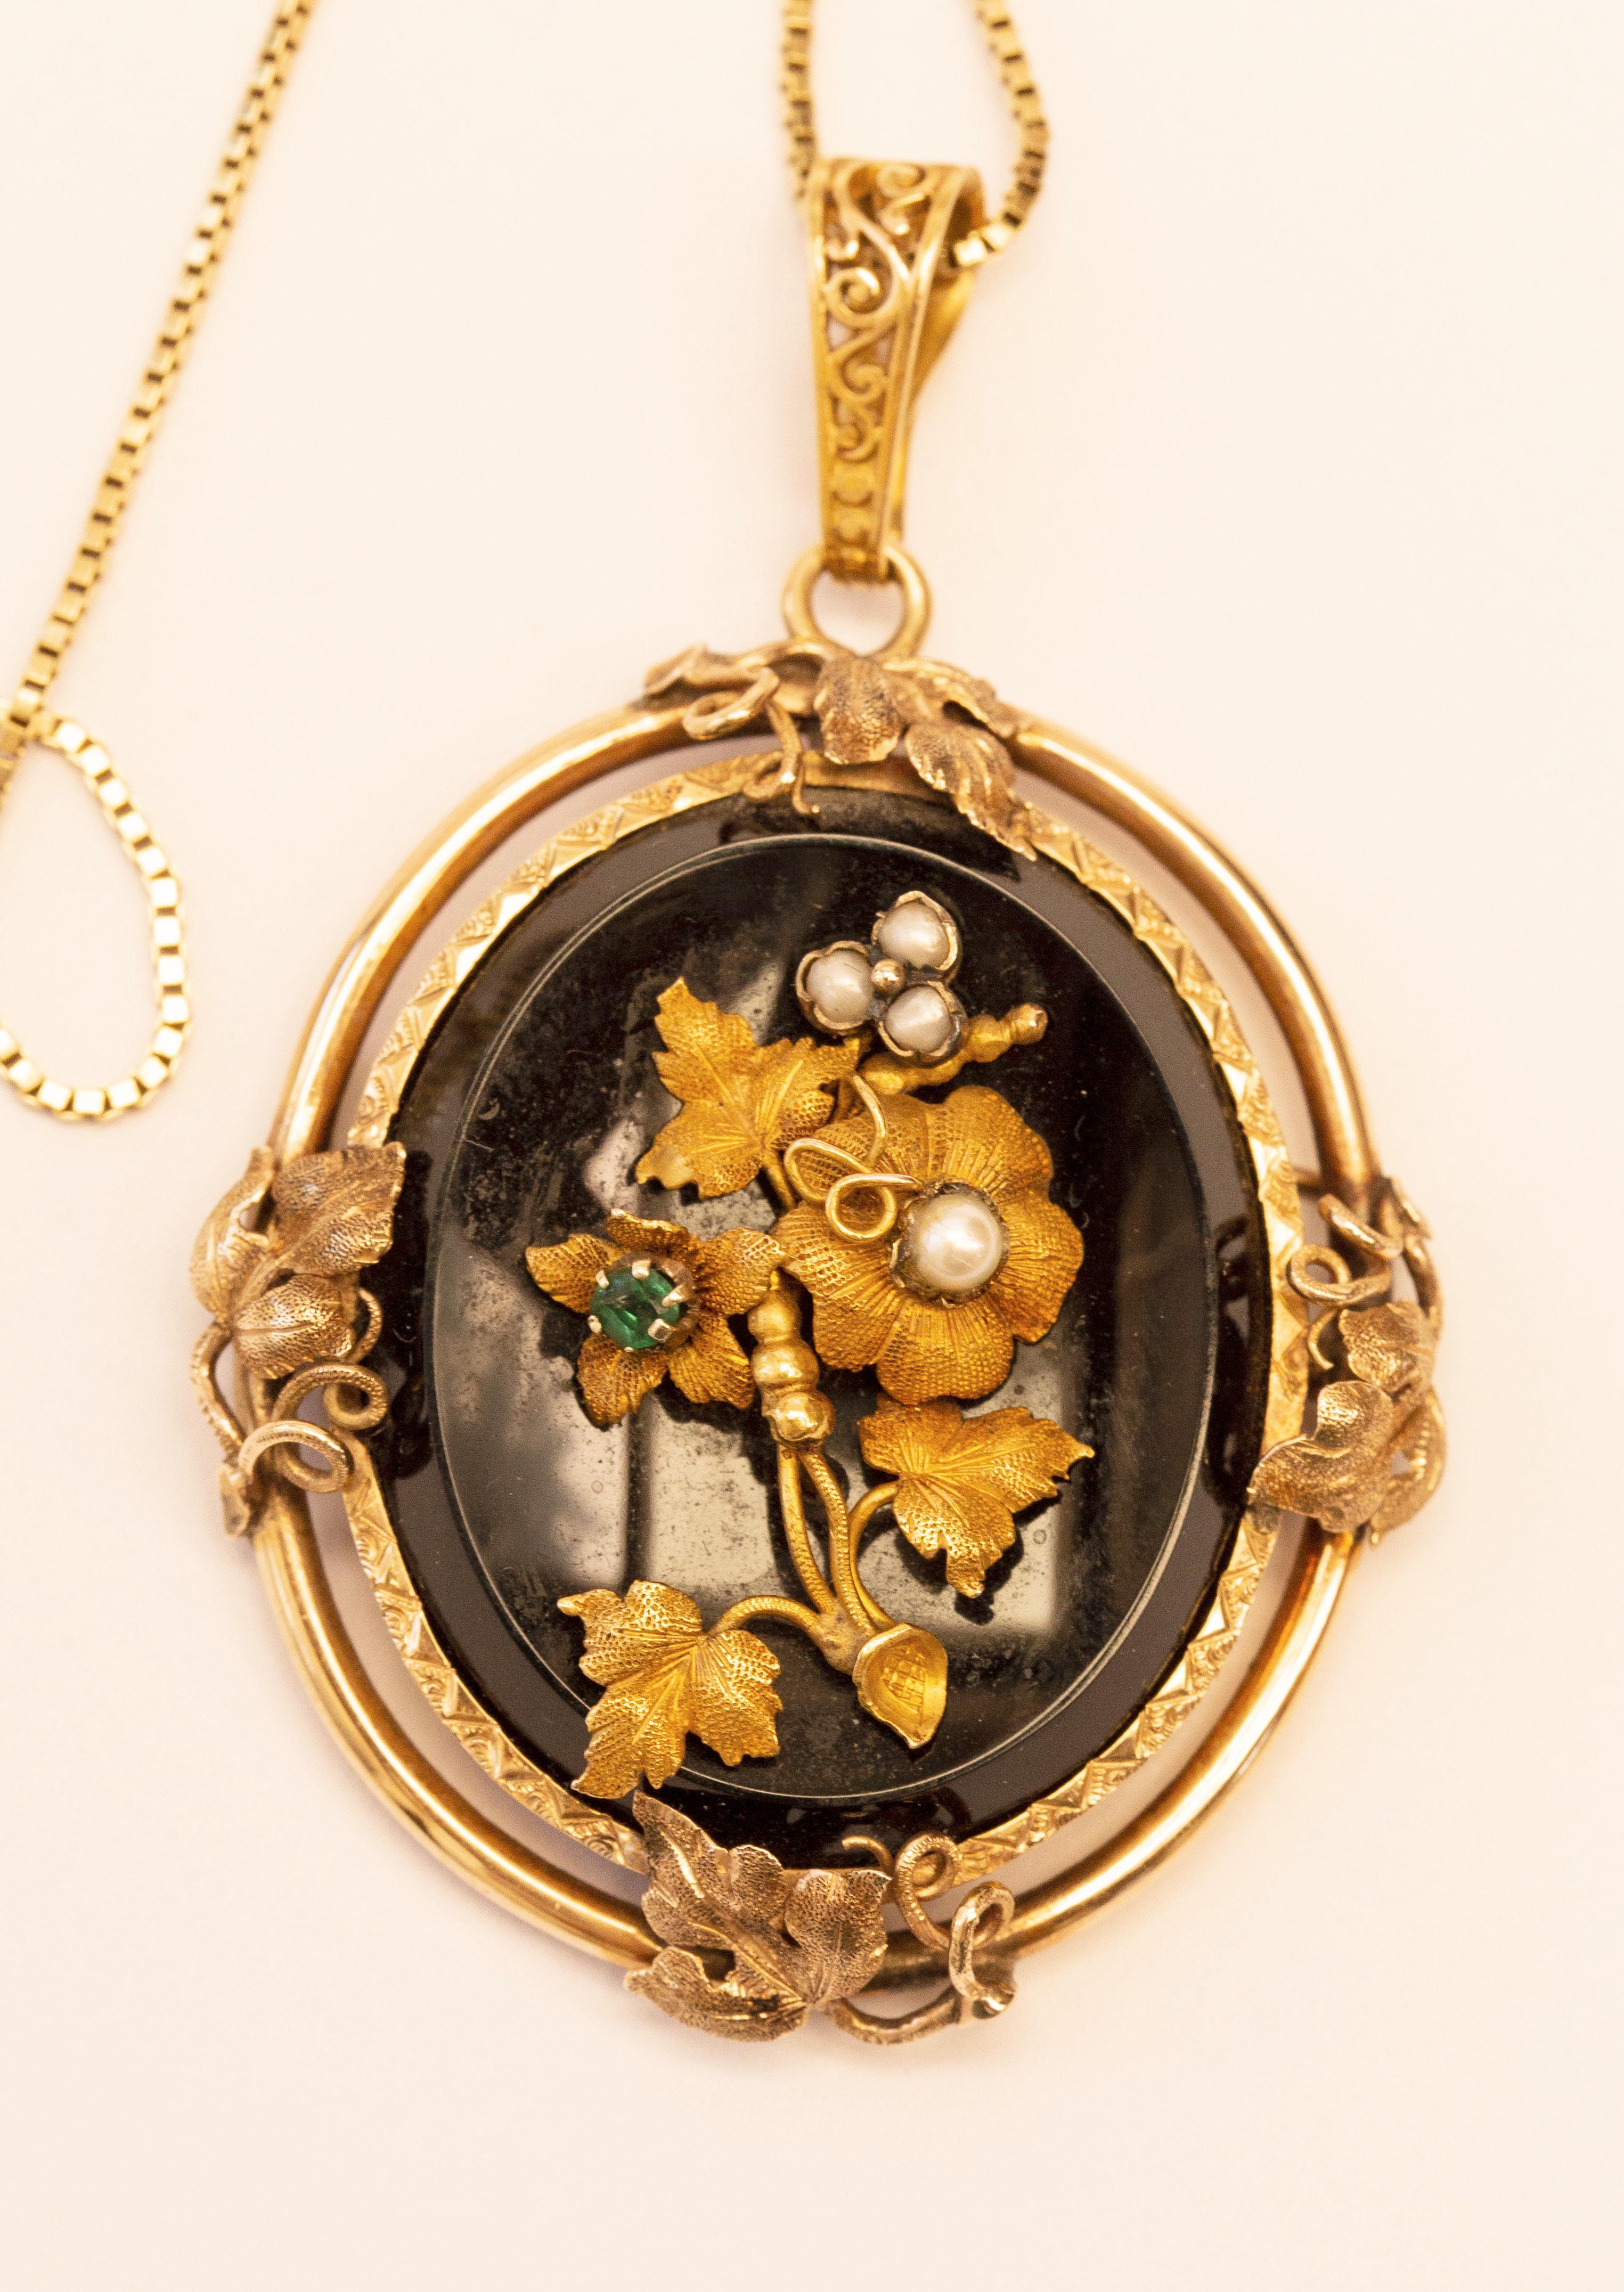 Antique 14 Karat Oval Onyx Pendant with Floral Emerald Pearl & Gold Decoration  For Sale 4